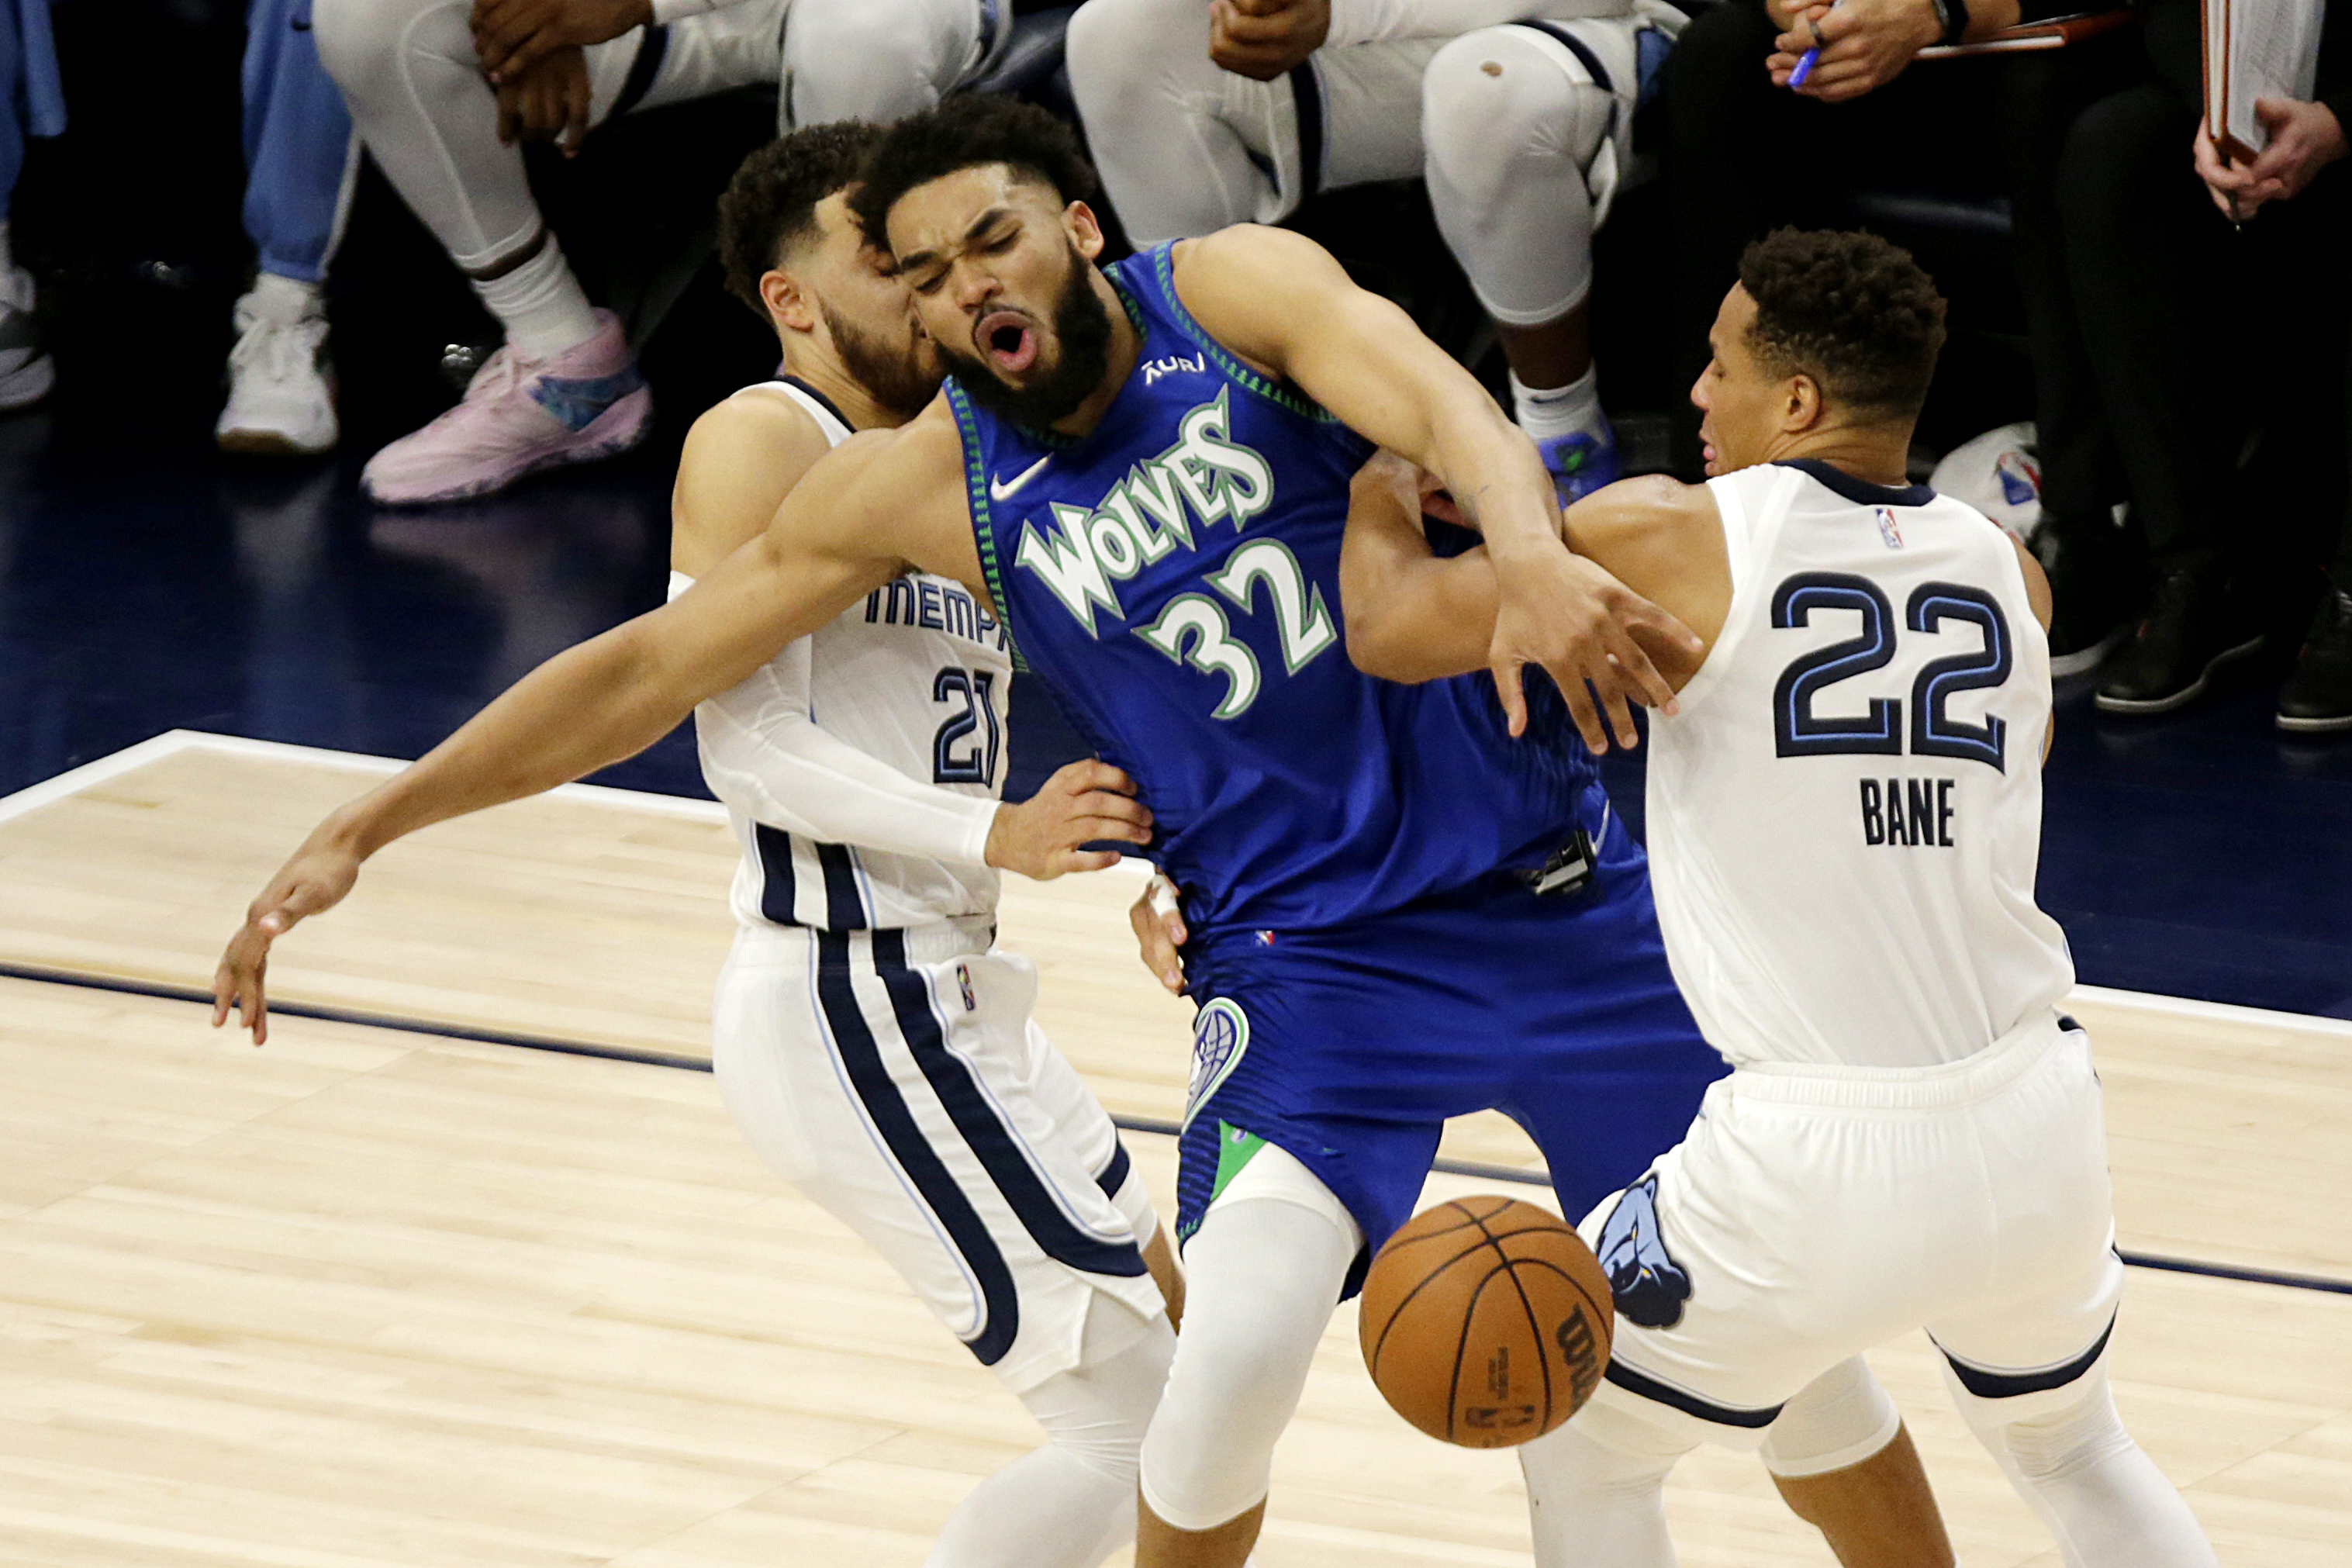 Karl-Anthony Towns Still Has Some Untapped Potential As A Scorer